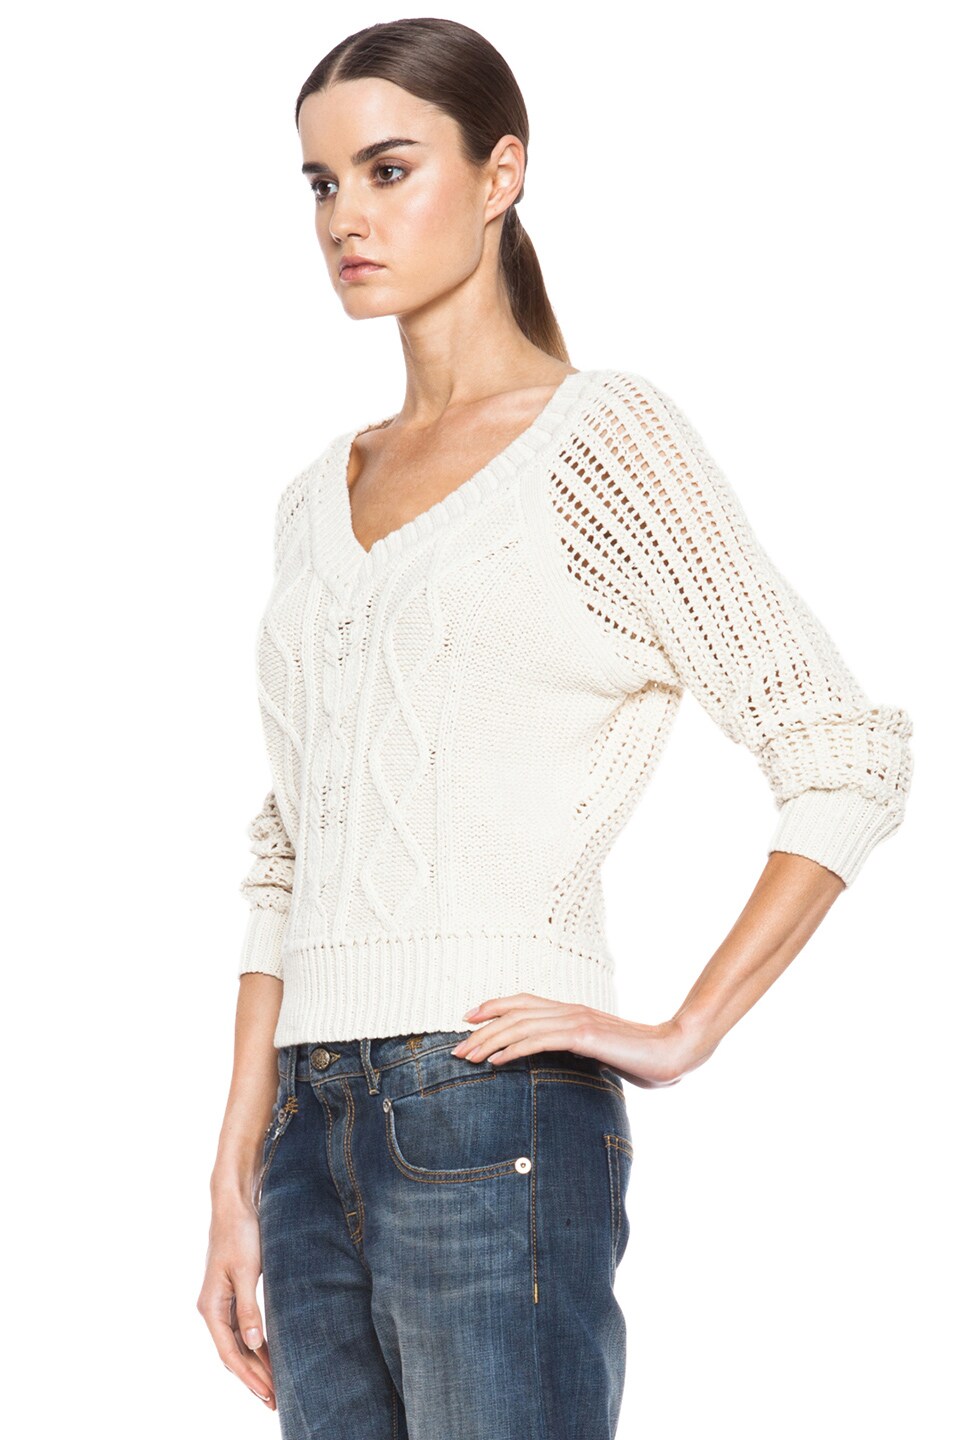 Band of Outsiders V-Neck Cable Knit Tennis Sweater in Ivory | FWRD